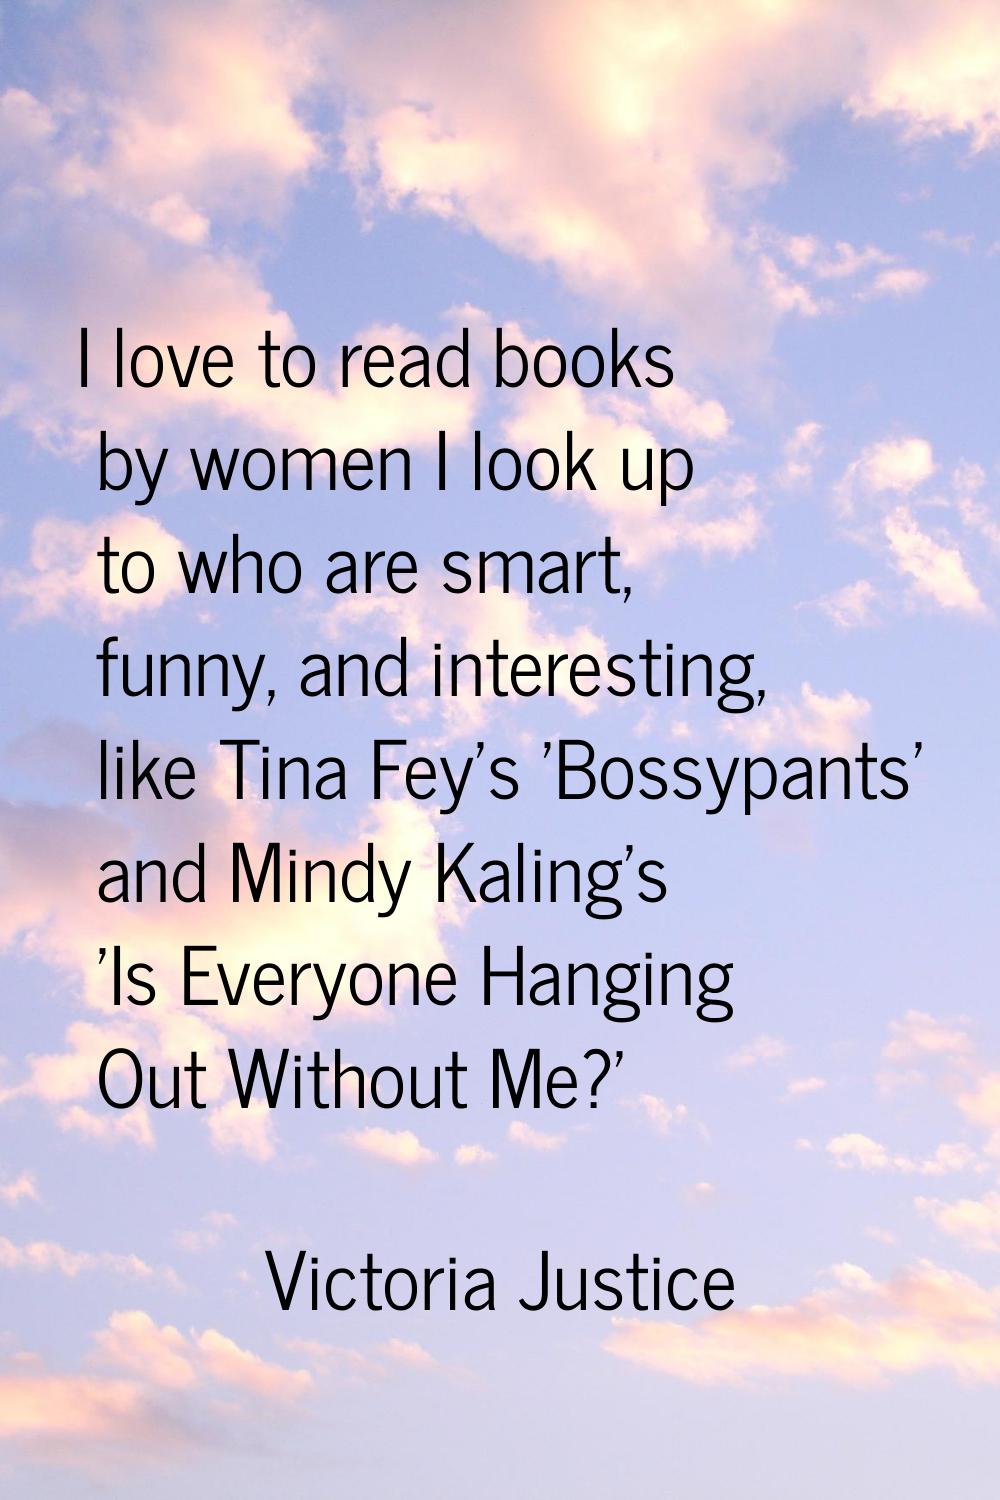 I love to read books by women I look up to who are smart, funny, and interesting, like Tina Fey's '